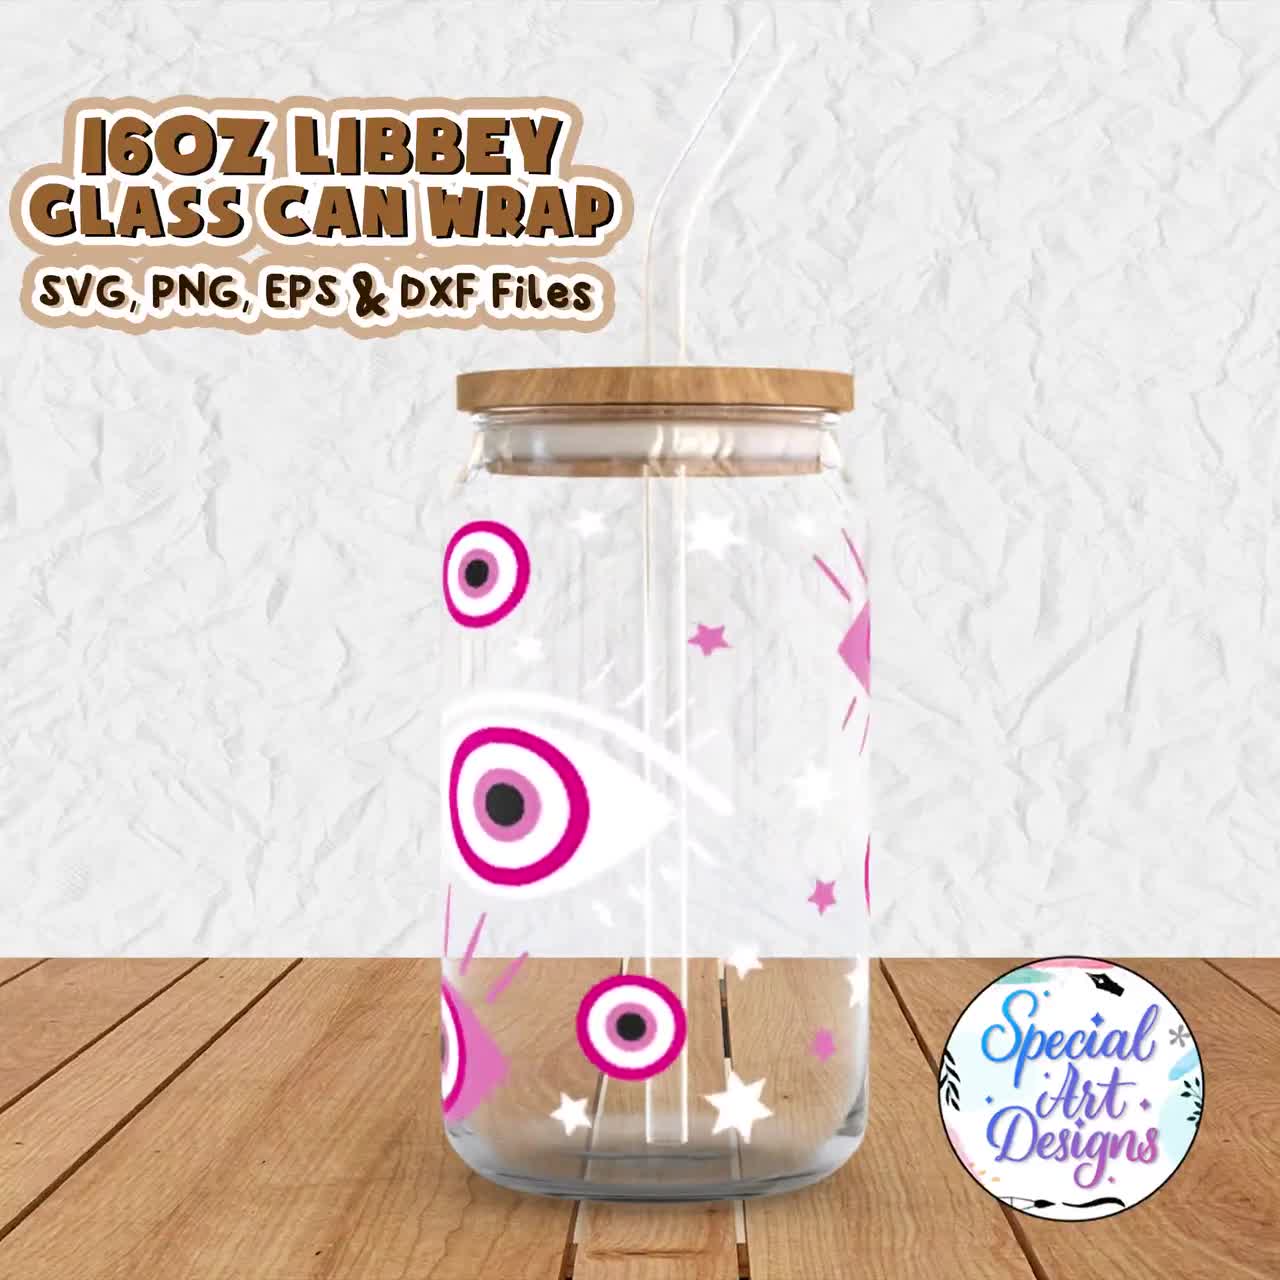 16 20 Oz Libbey Can Glass Template Wraps Graphic by Katine Design